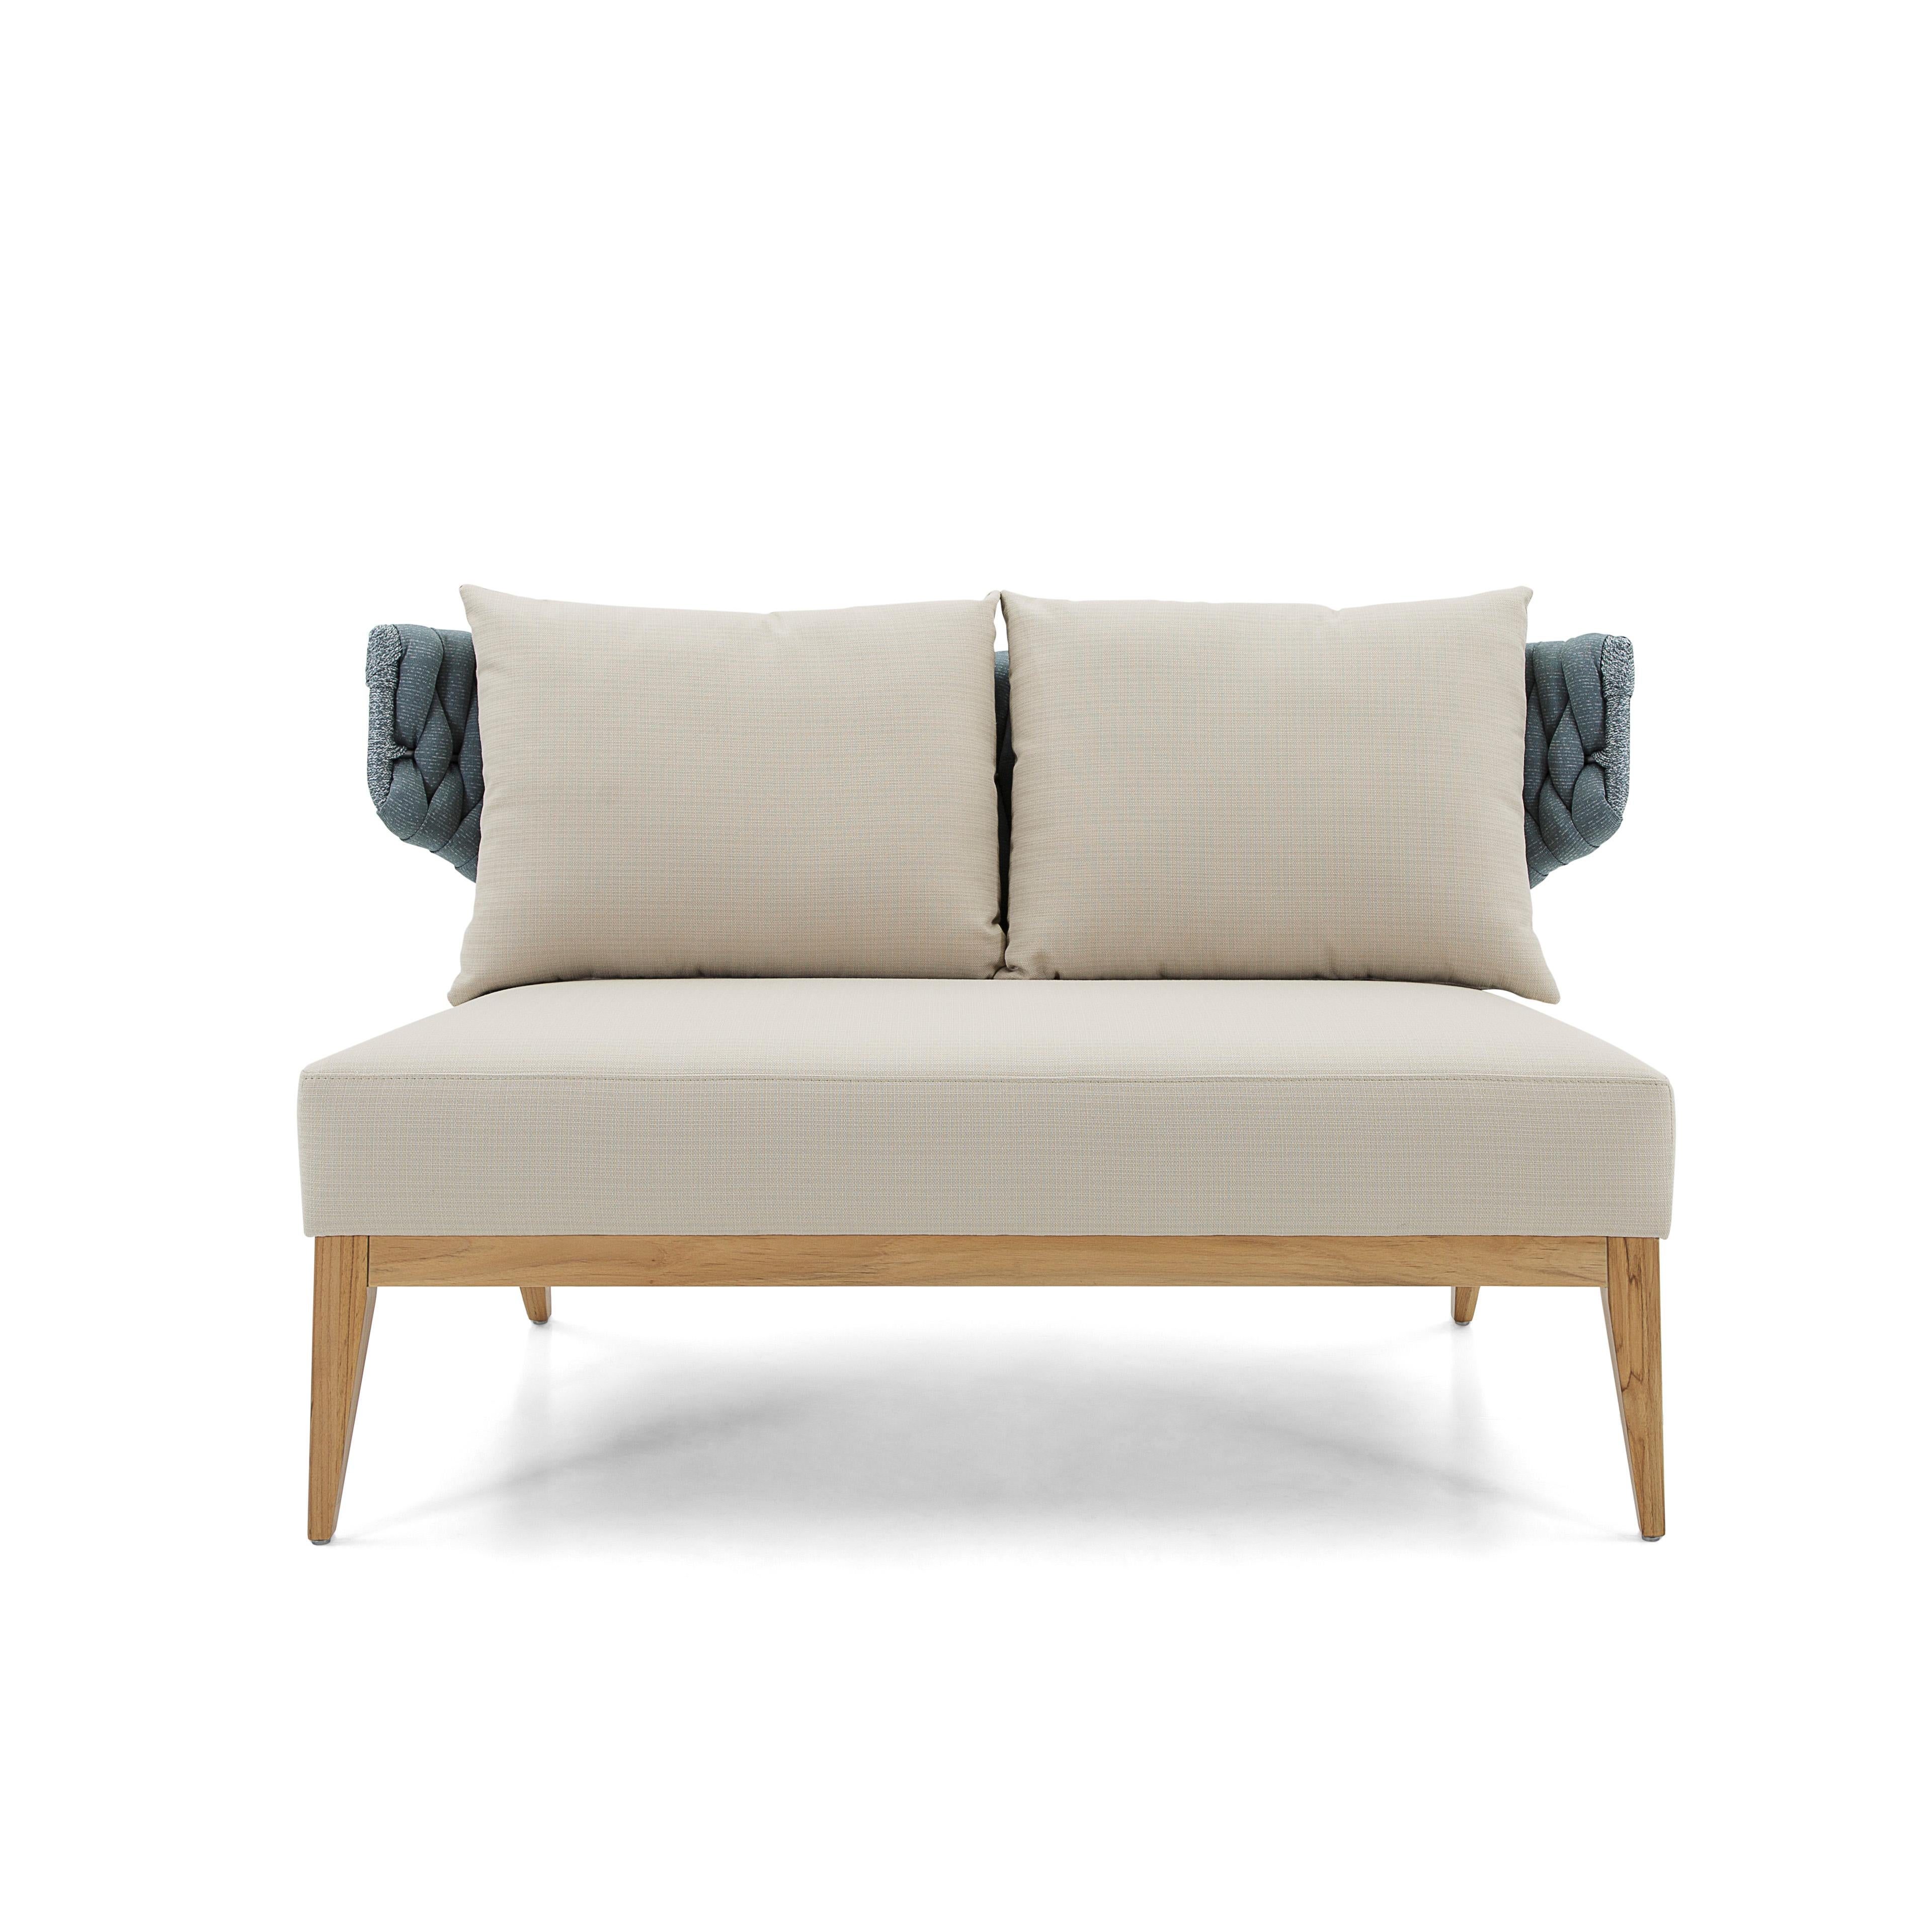 The Beluga loveseat is the perfect combination of a beige fabric covering the seat and pillows and blue fabric for the back, with wood legs in a teak finish to match this contemporary design. Uultis have designed this incredible armchair to give you